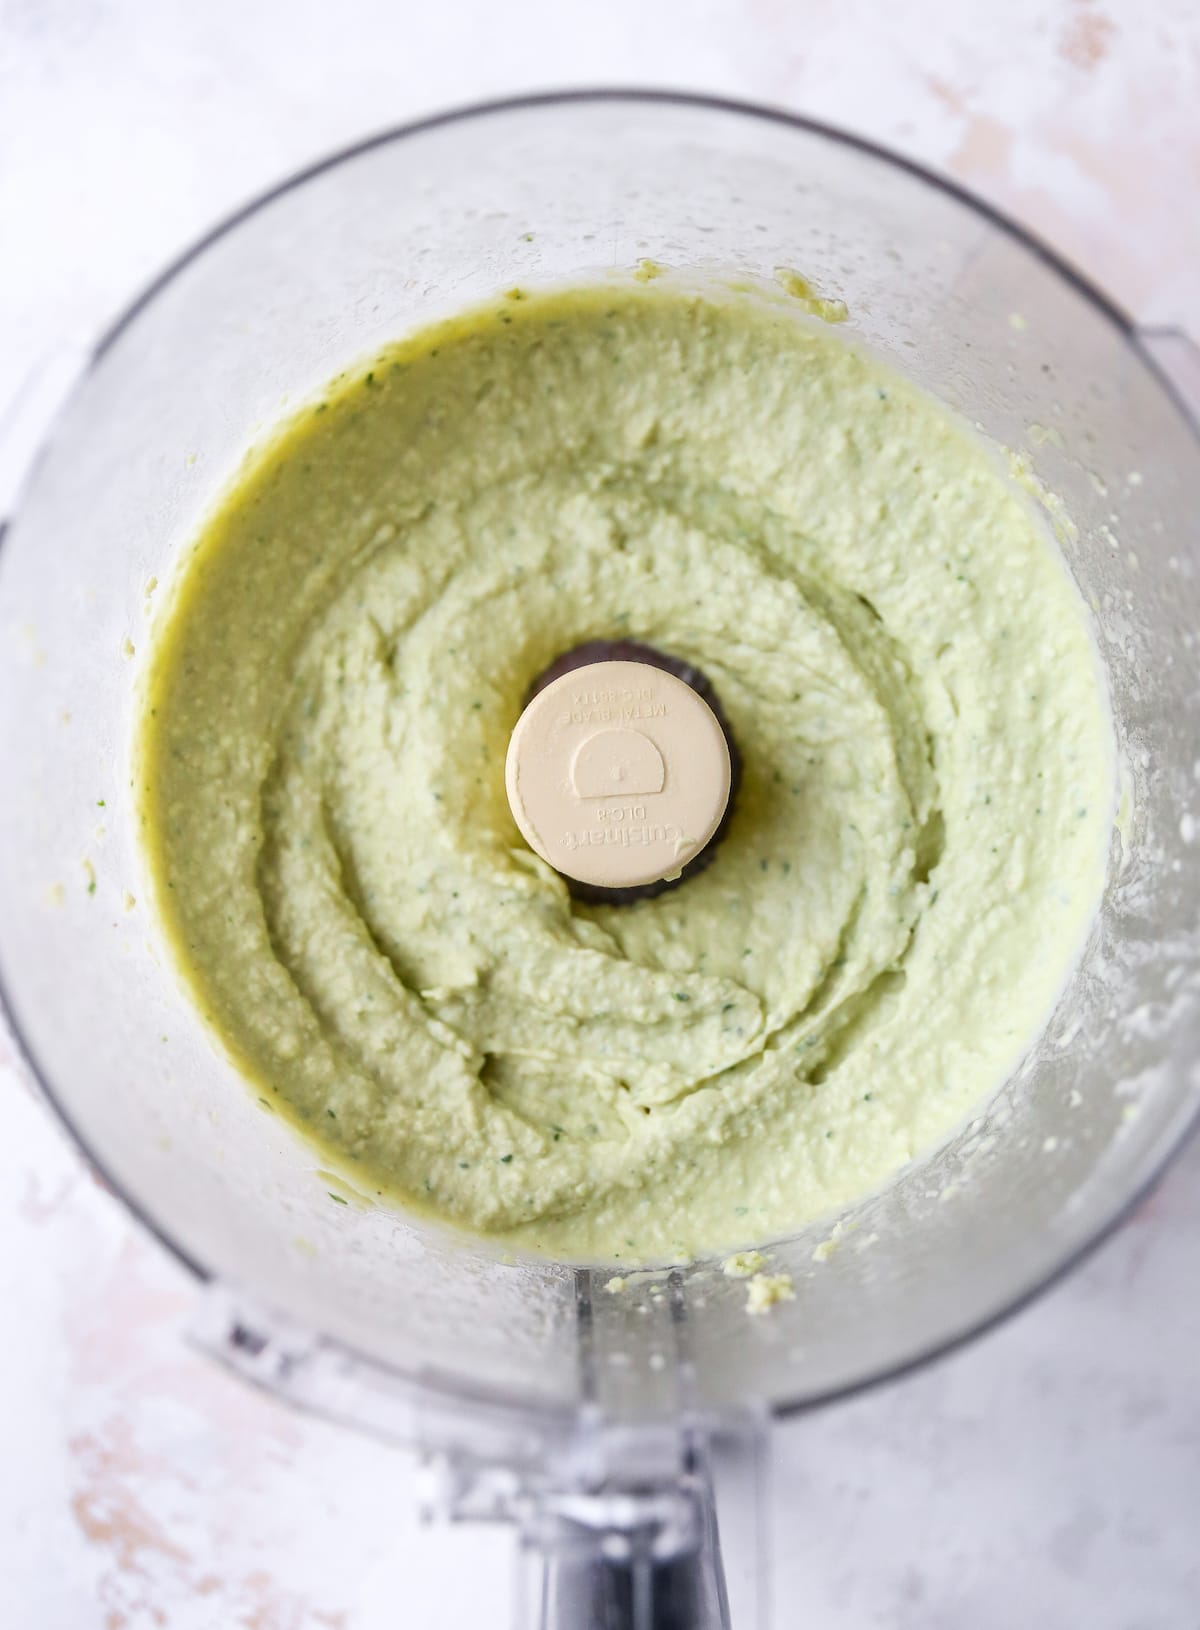 Lima bean hummus blended in a food processor.